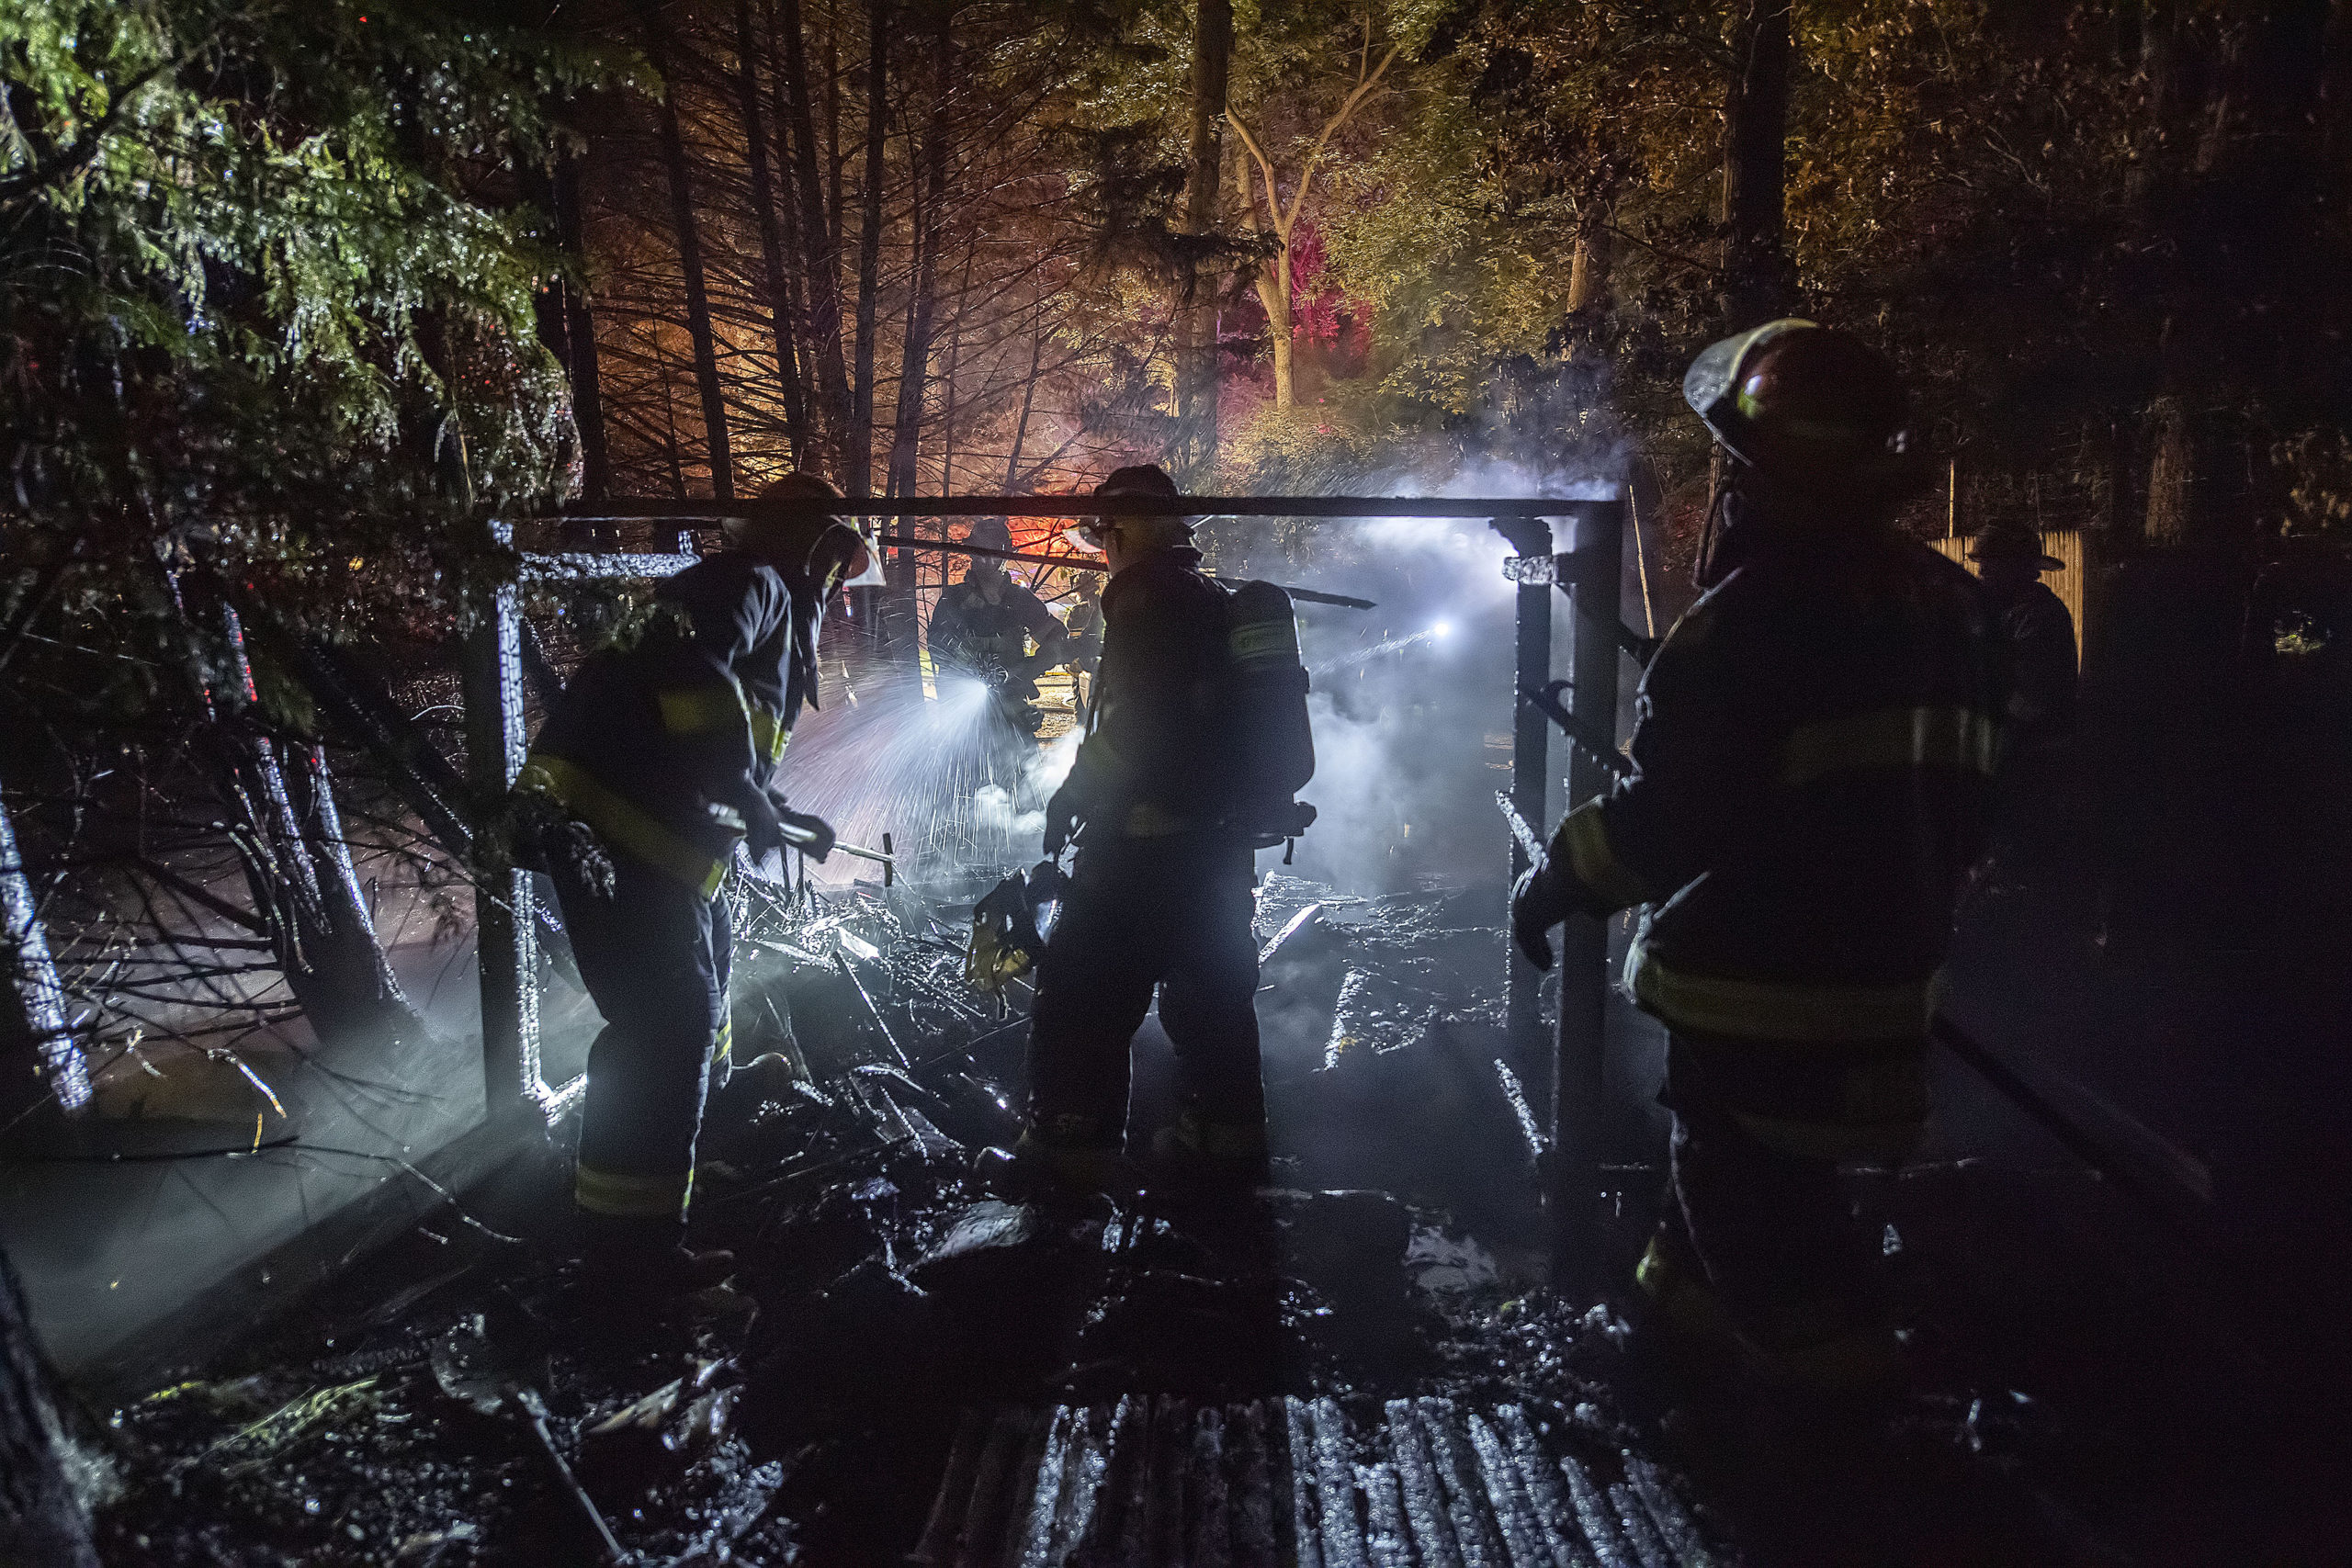 East Hampton firefighters were called out to extinguish a fire that destroyd a shed on Cove Hollow Road in East Hampton late June 17. MICHAEL HELLER PHOTOS